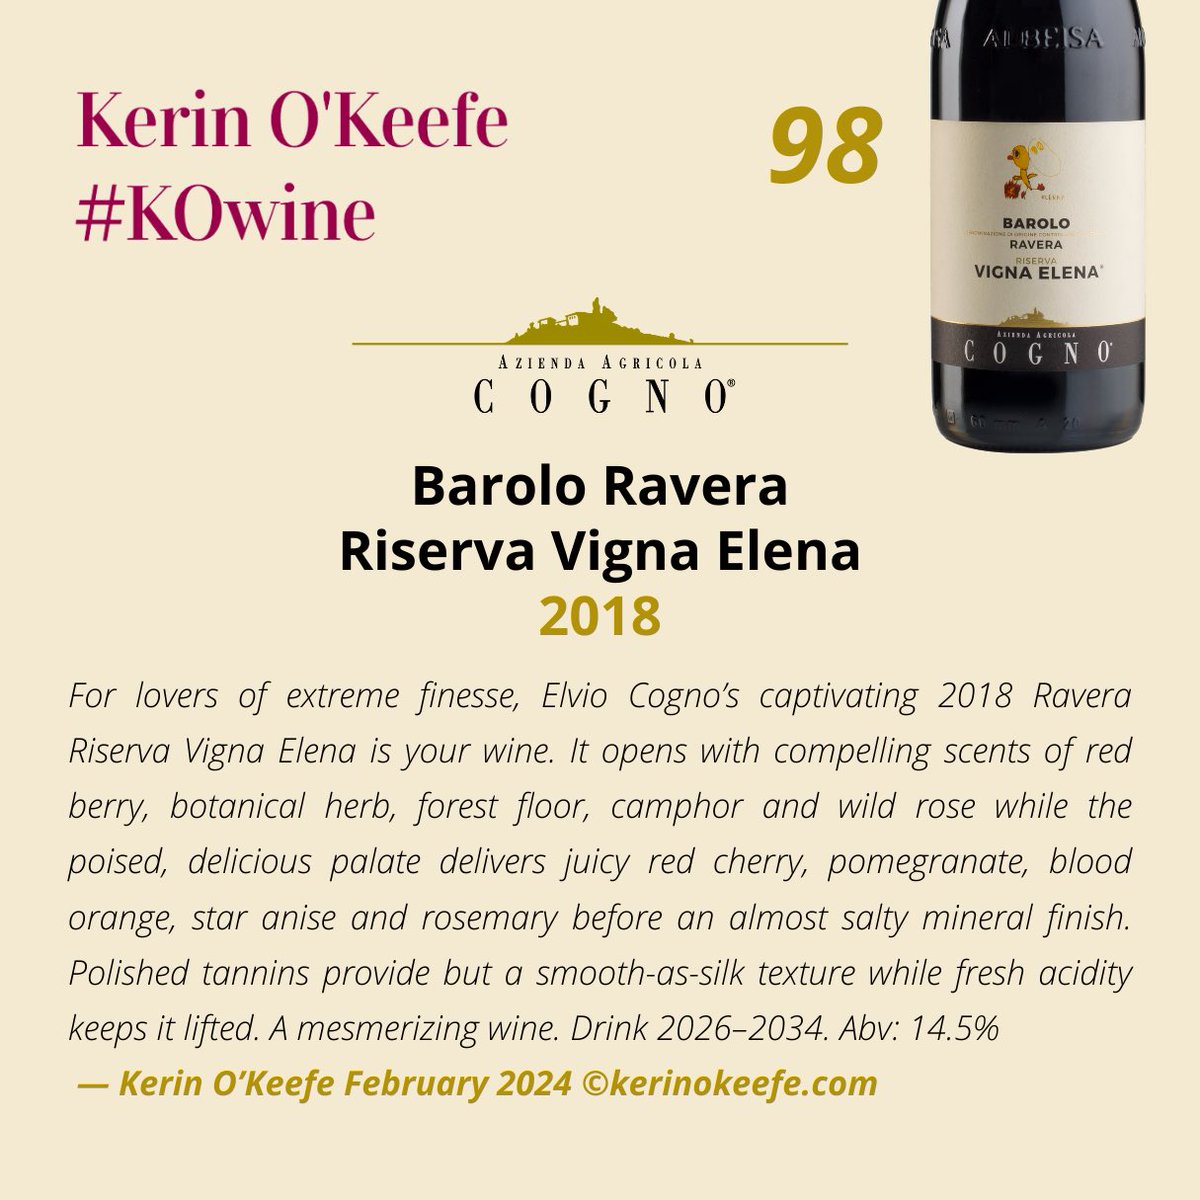 Thank you so much @KerinOKeefe for this beautiful review of our Barolo Ravera Riserva Vigna Elena 2018! 🙏 #elviocogno #kerinokeefe #winereview